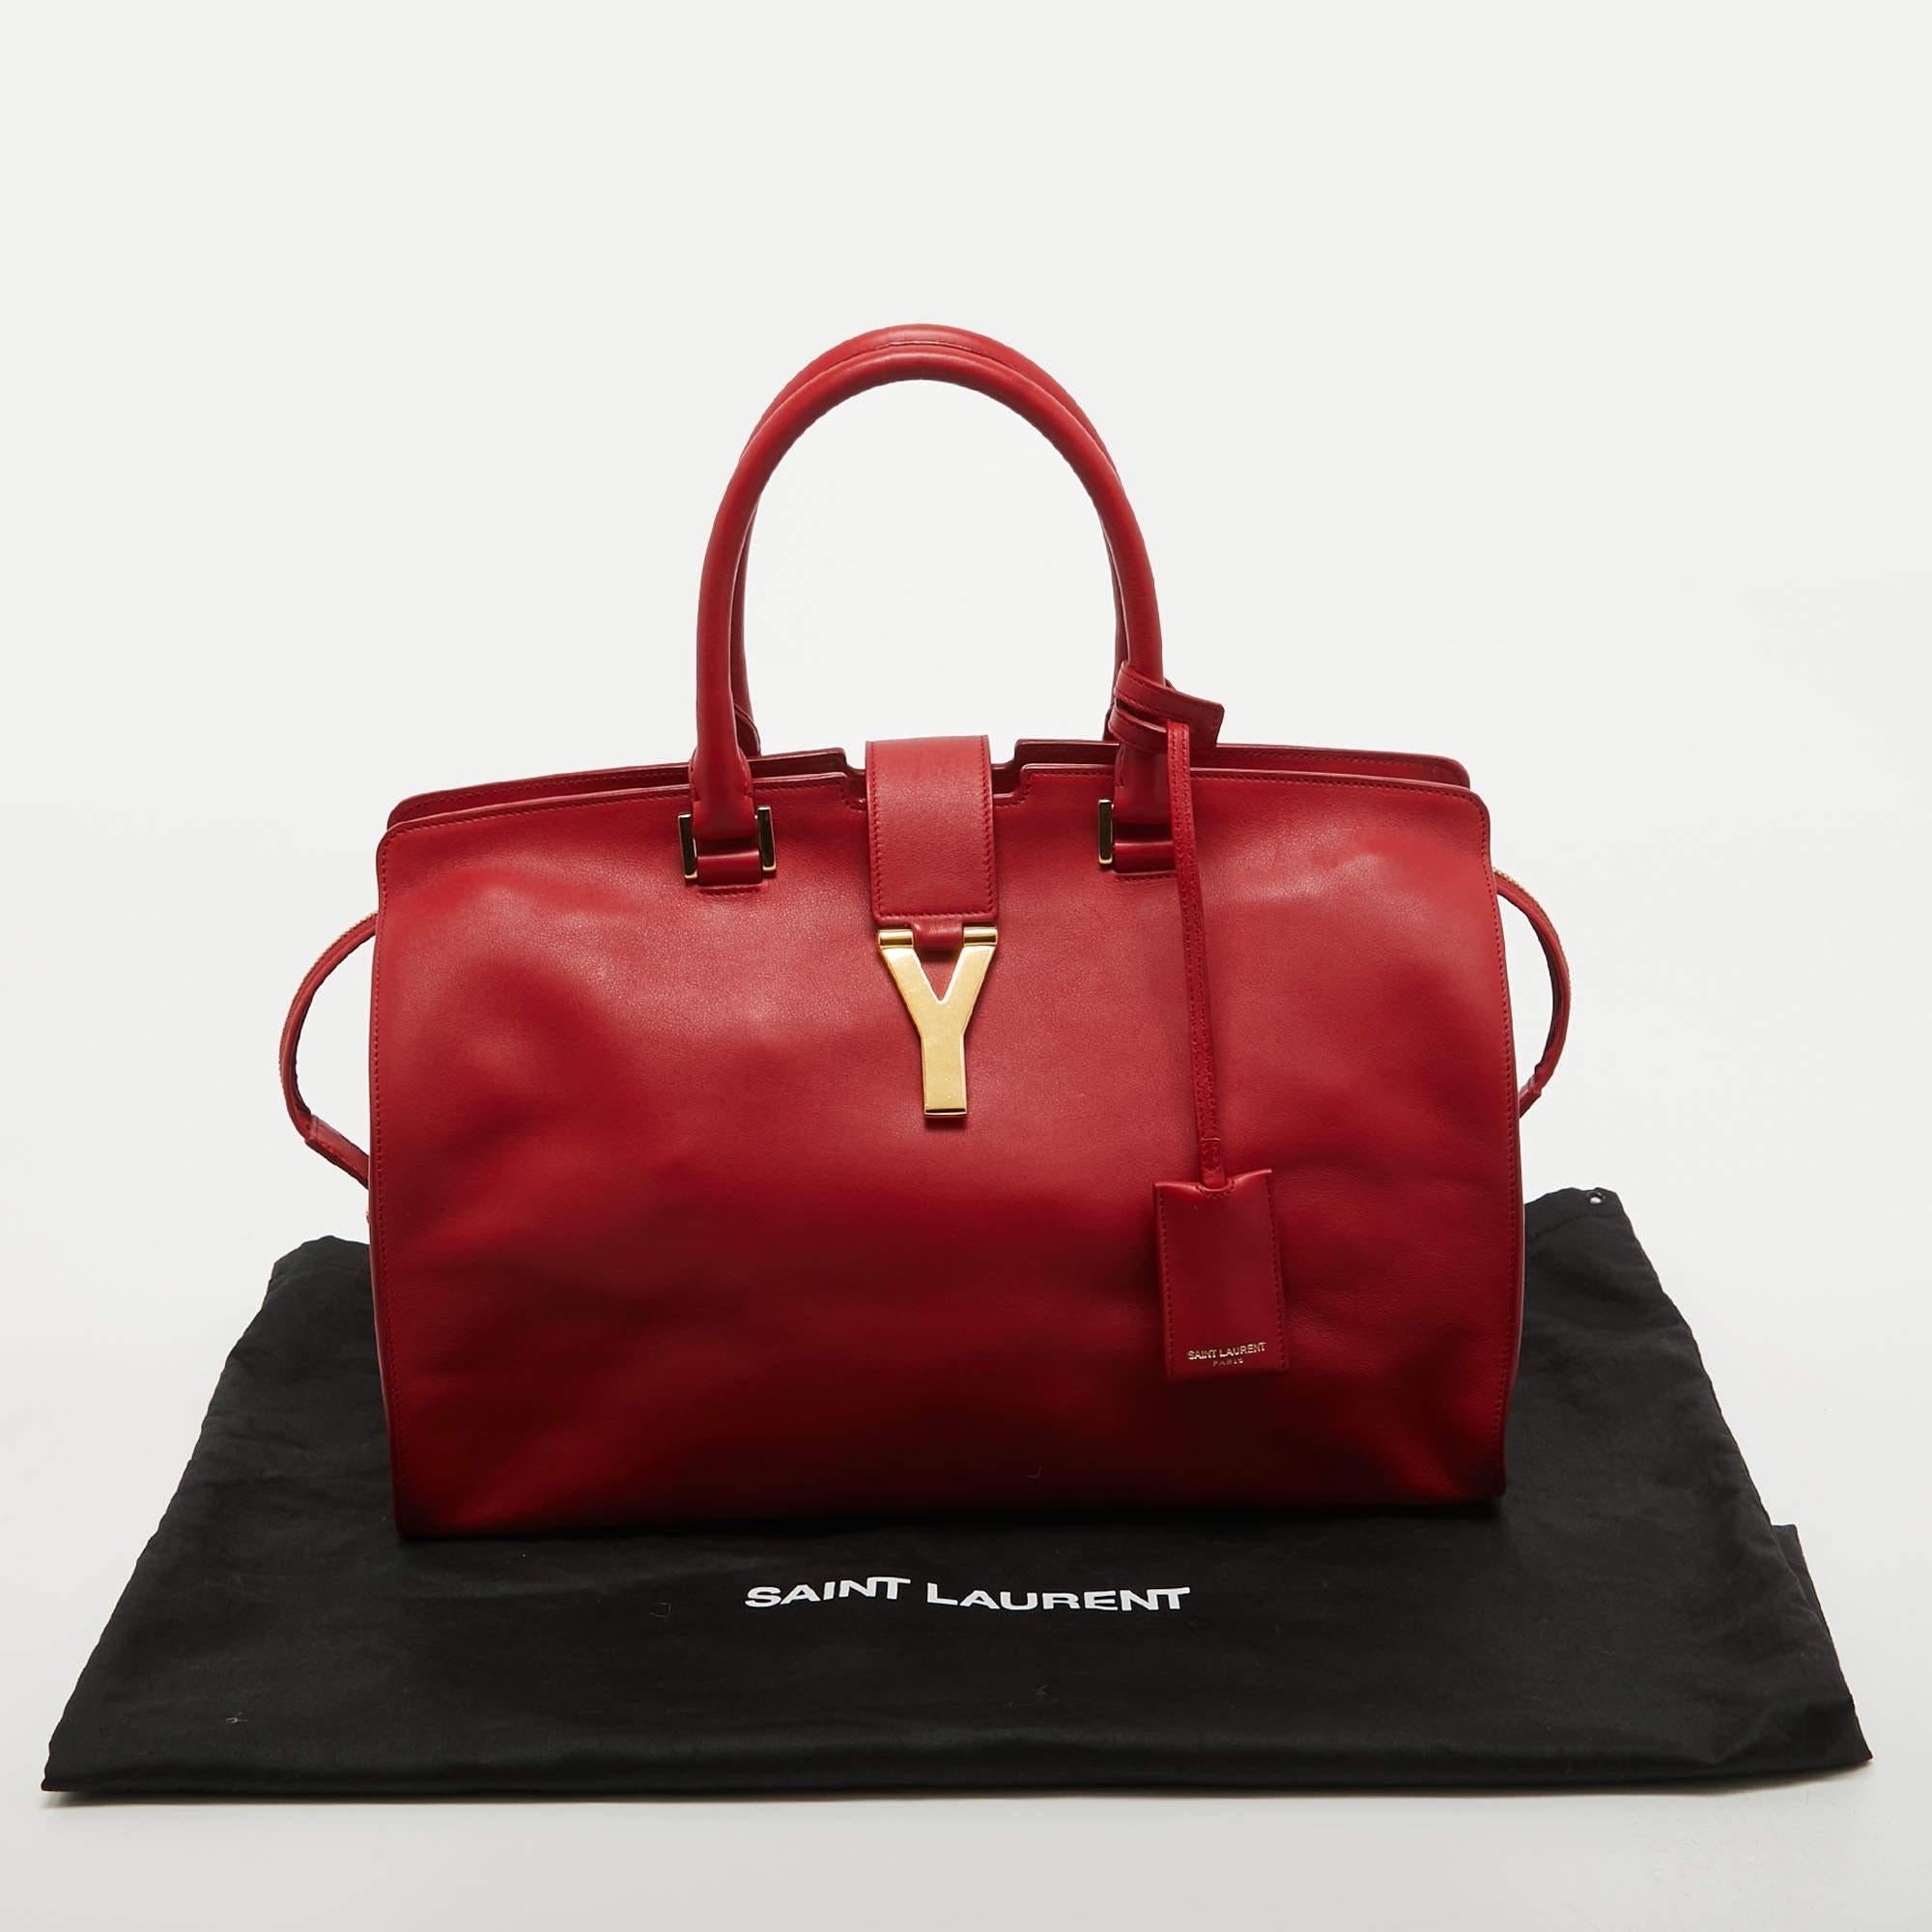 Saint Laurent Red Leather Medium Cabas Chyc Tote 10